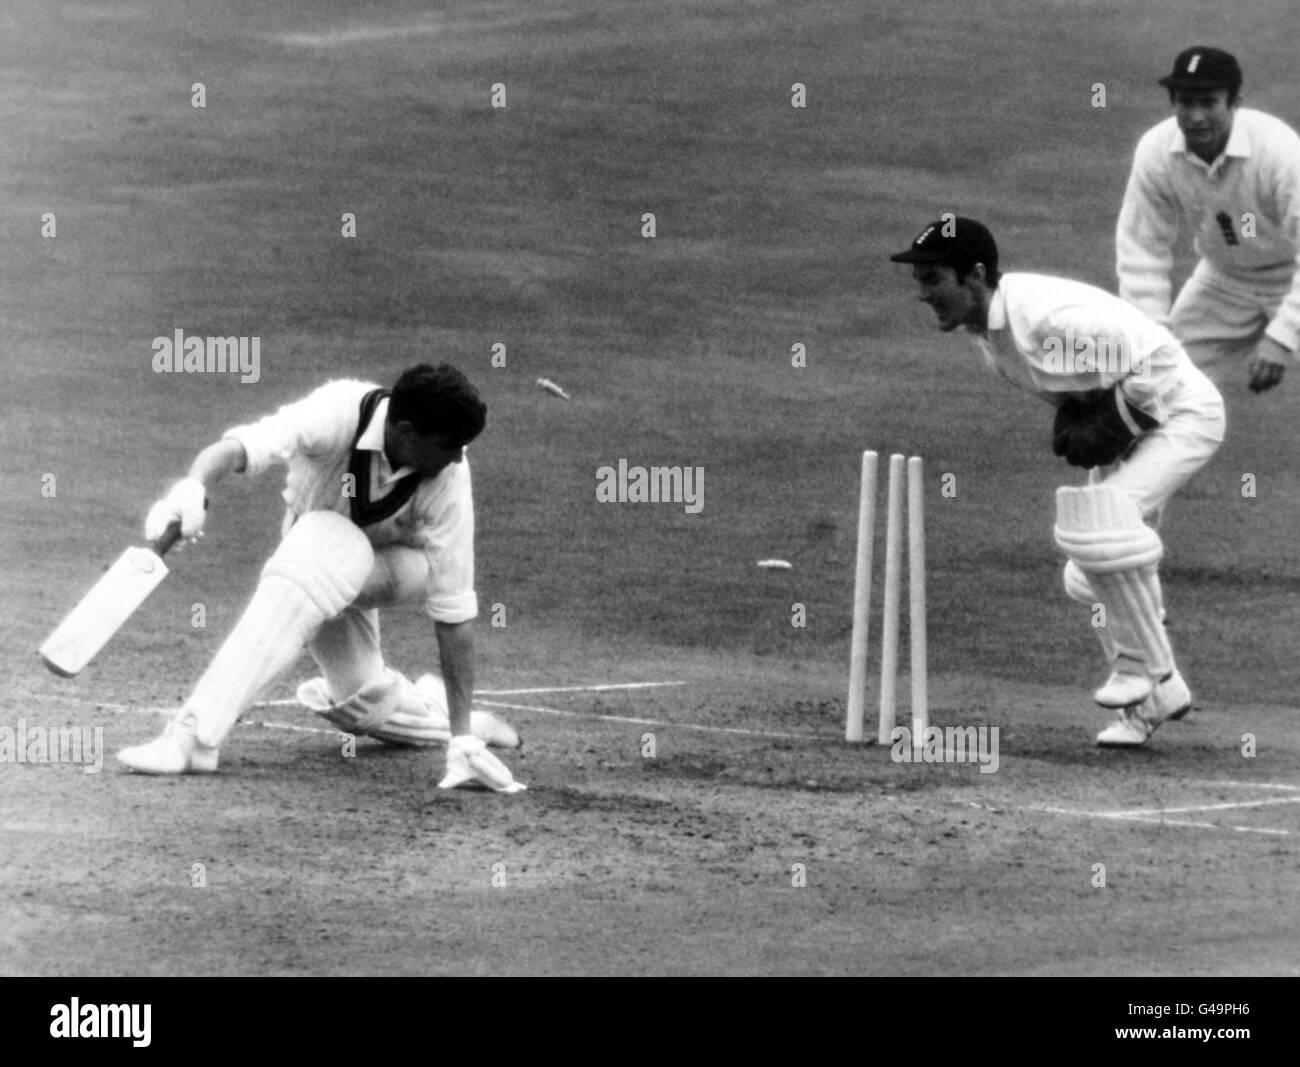 PA. 2266782 Cricket - The Ashes - Fourth Test - England v Australia - Fourth Day - Headingley. Paul Sheahan is out for 31, stumped by Alan Knott at Headingley Stock Photo